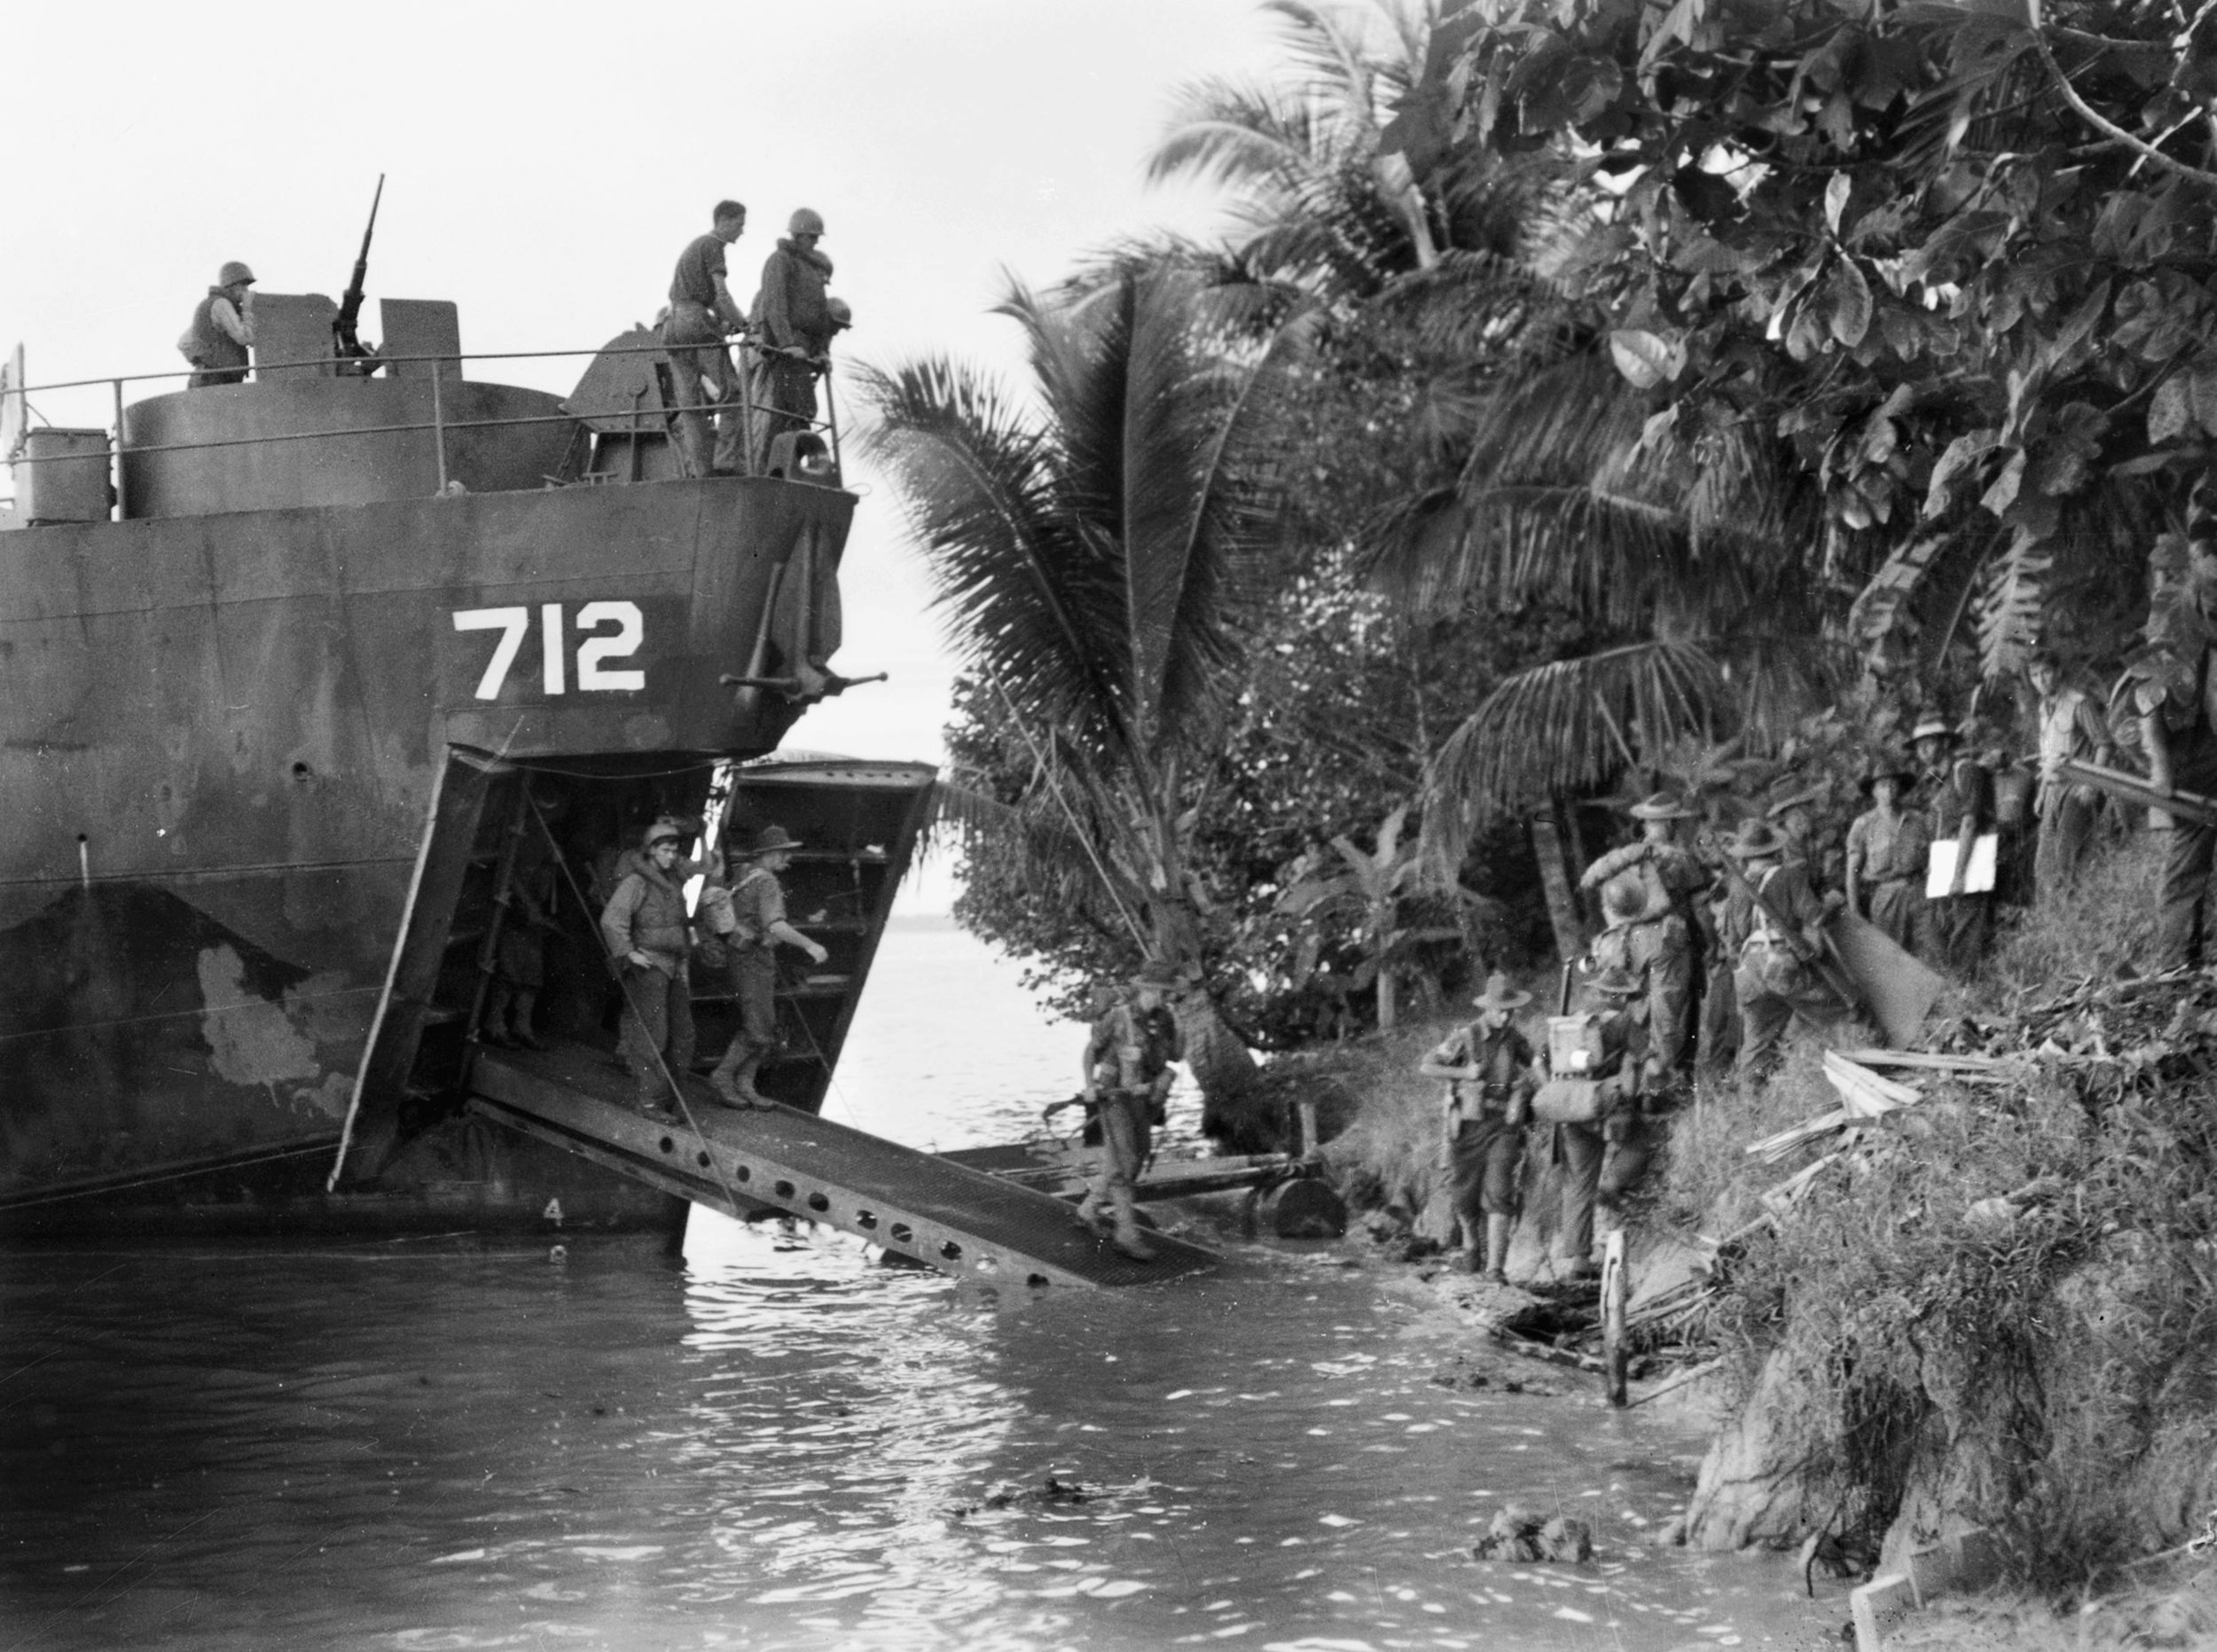 Piling out of a landing craft unopposed at Sadau Island, Borneo, on April 30, 1945, troopers of 2/4 Commando familiarize themselves with their surroundings. No resistance from the Japanese was encountered on the island, and the Australians suffered no casualties.